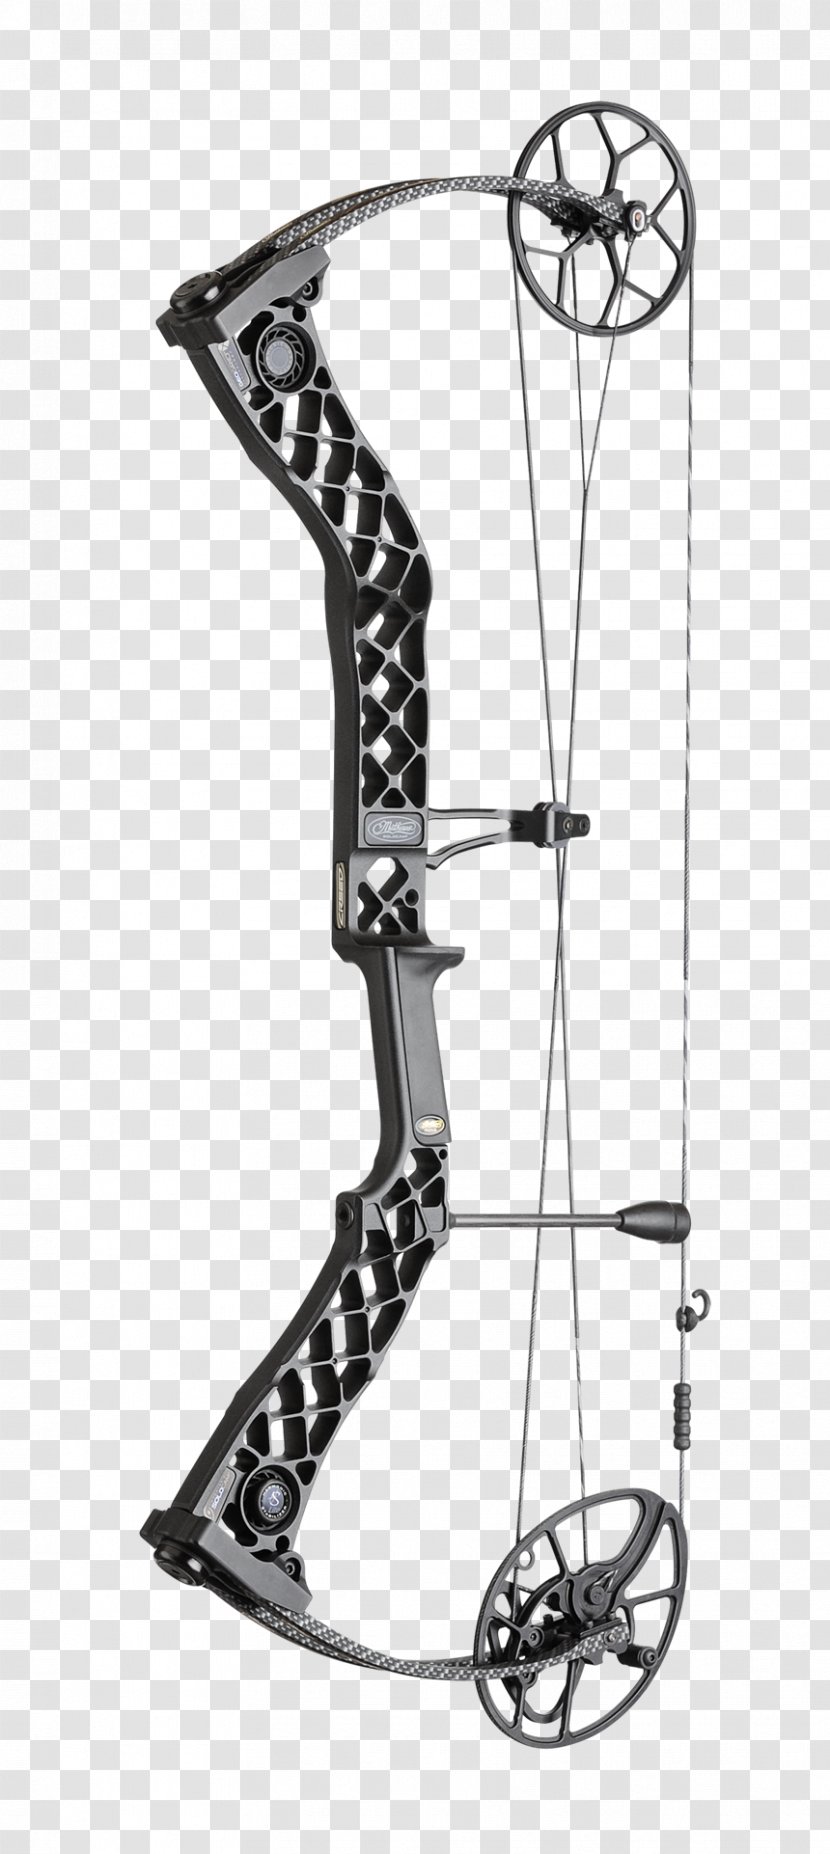 Archery Bow And Arrow Compound Bows Bowhunting - Apex Hunting Transparent PNG